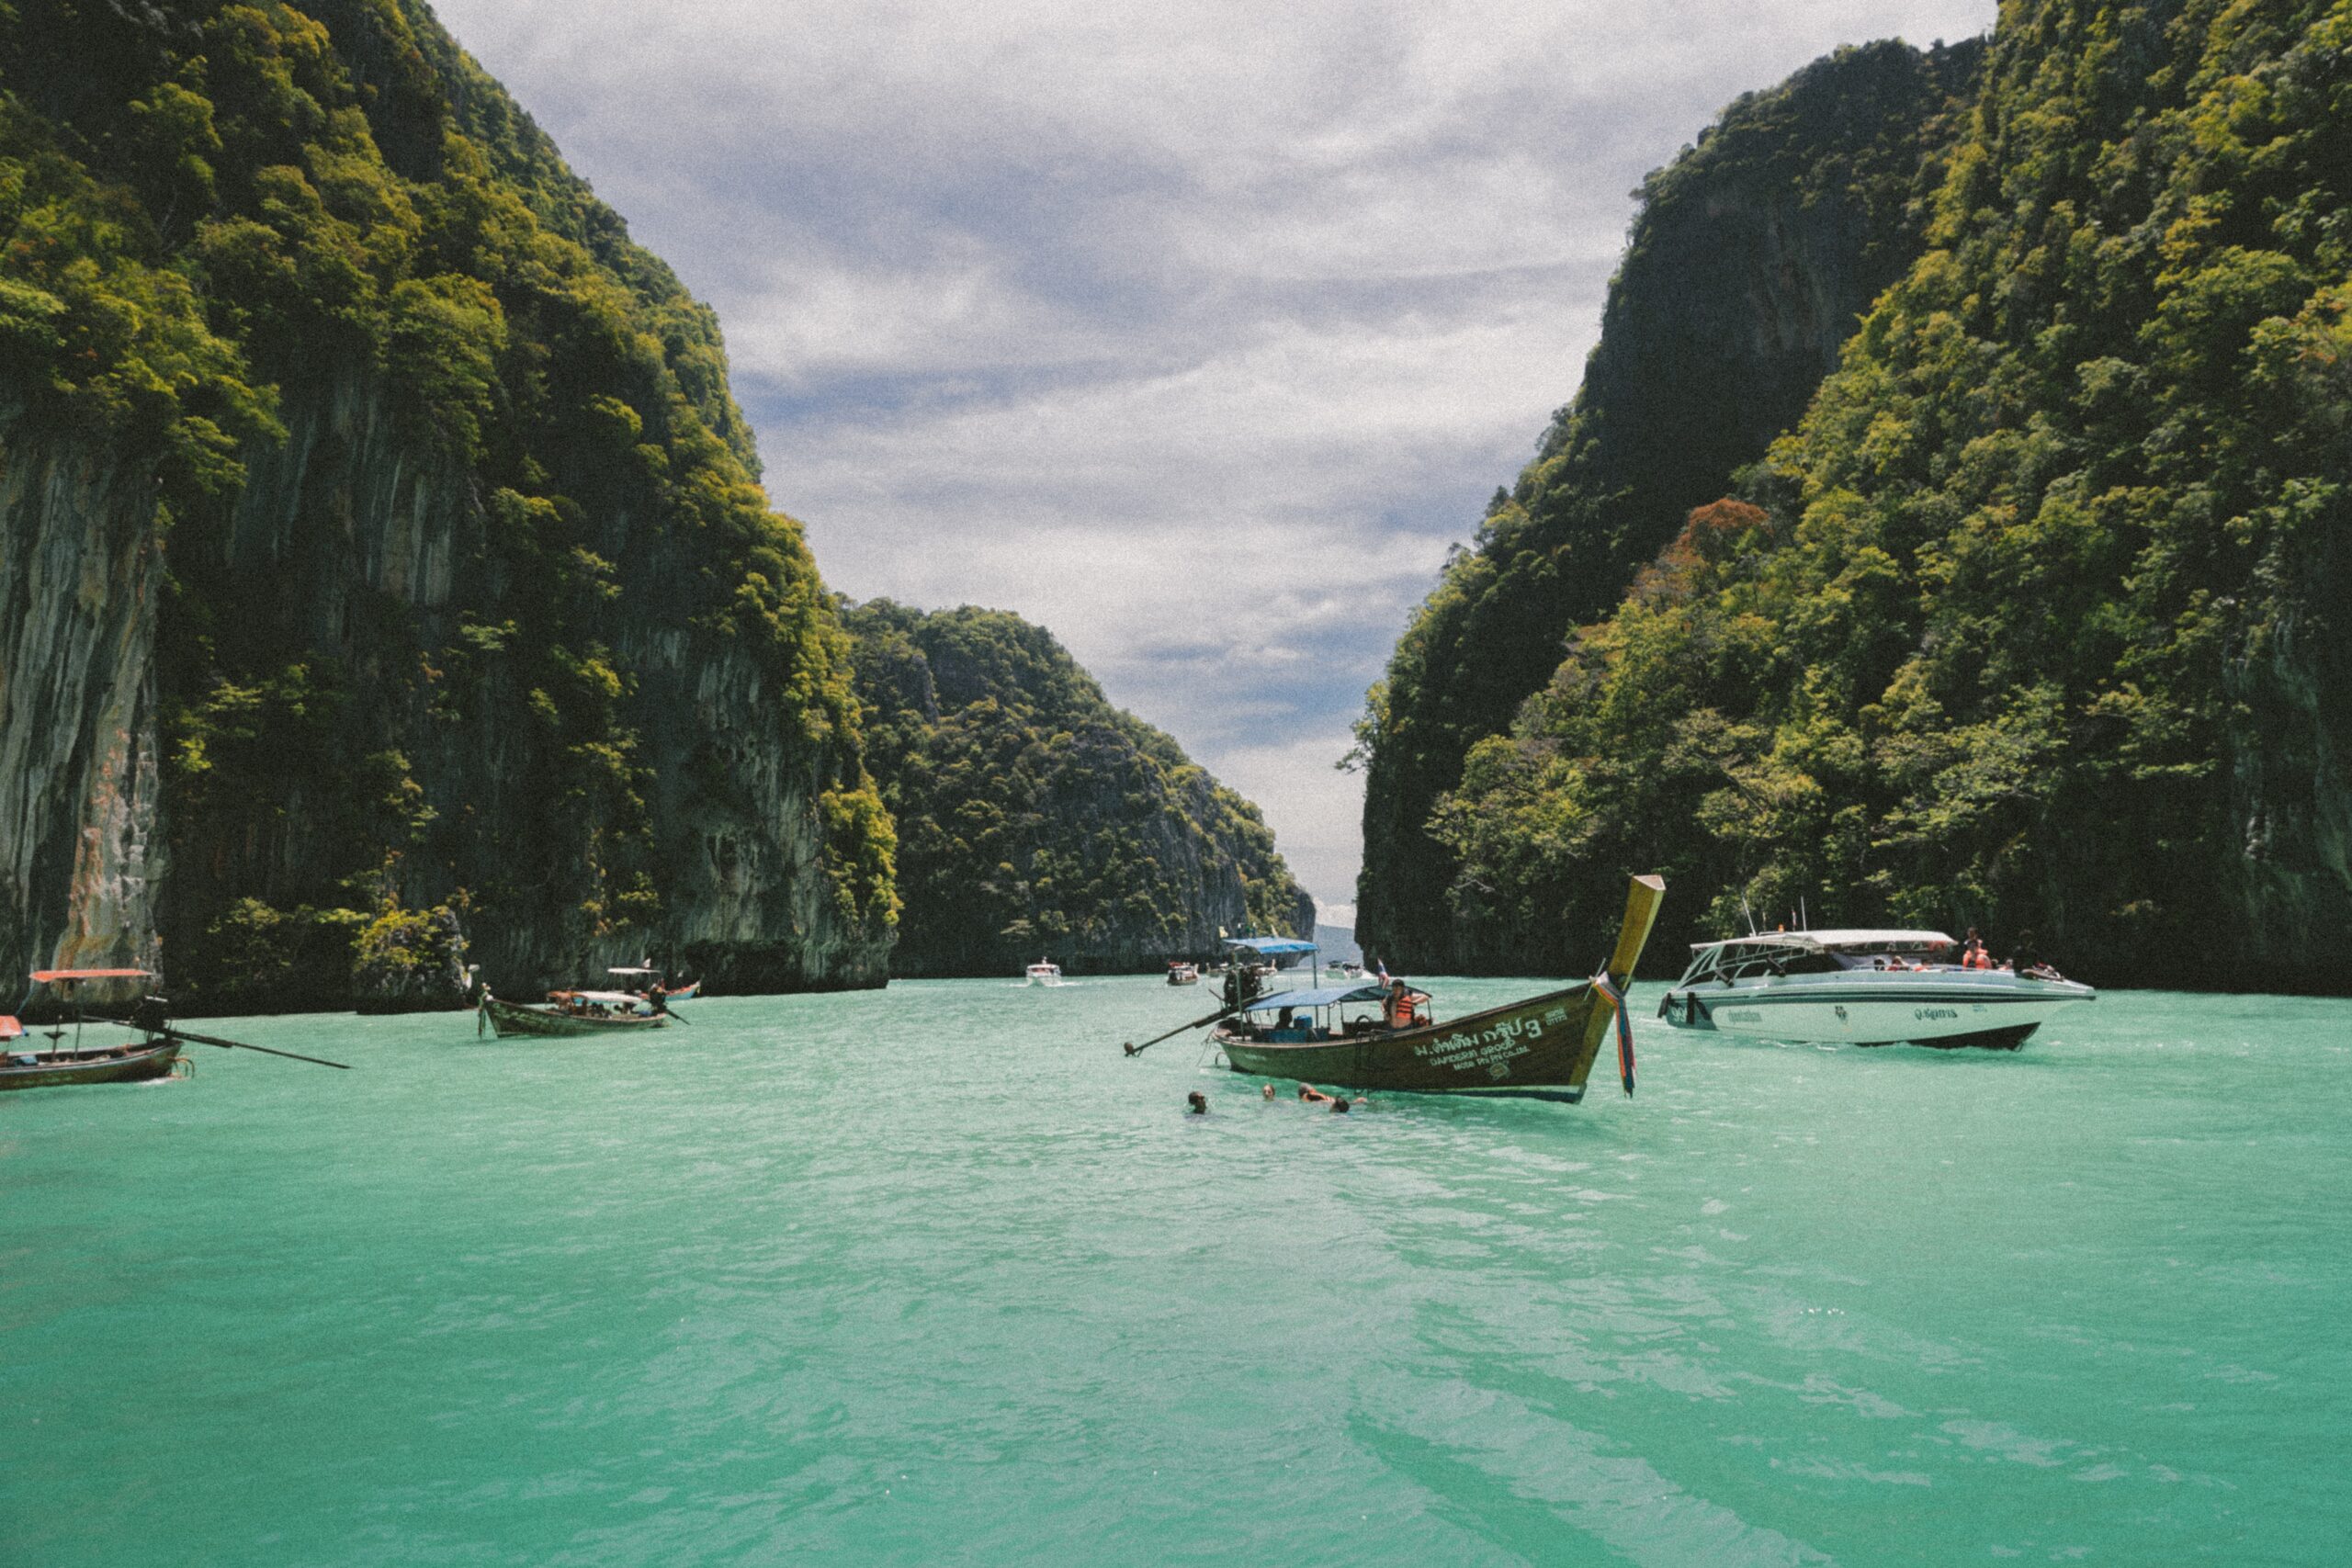 Thailand is a wonderful destination that is safe for travelers. Check out how tourists can travel safely and securely. 
Pictured: the turquoise waters of a series of islands with boats lingering 